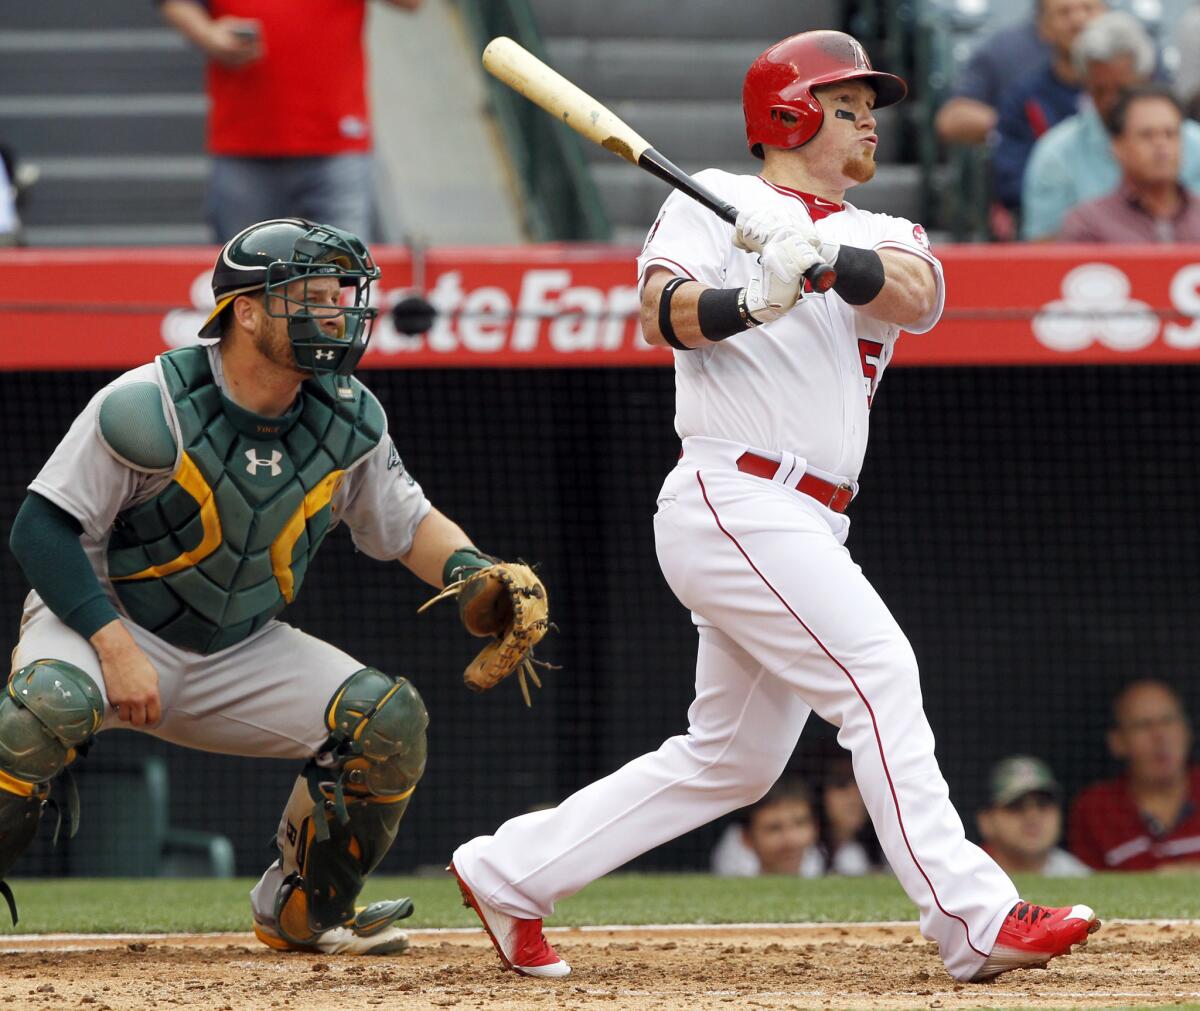 Outfielder kole Calhoun watches his two-run home run in the third inning against the Athletics -- the Angels' only hit of the game. The Angels won 2-0.